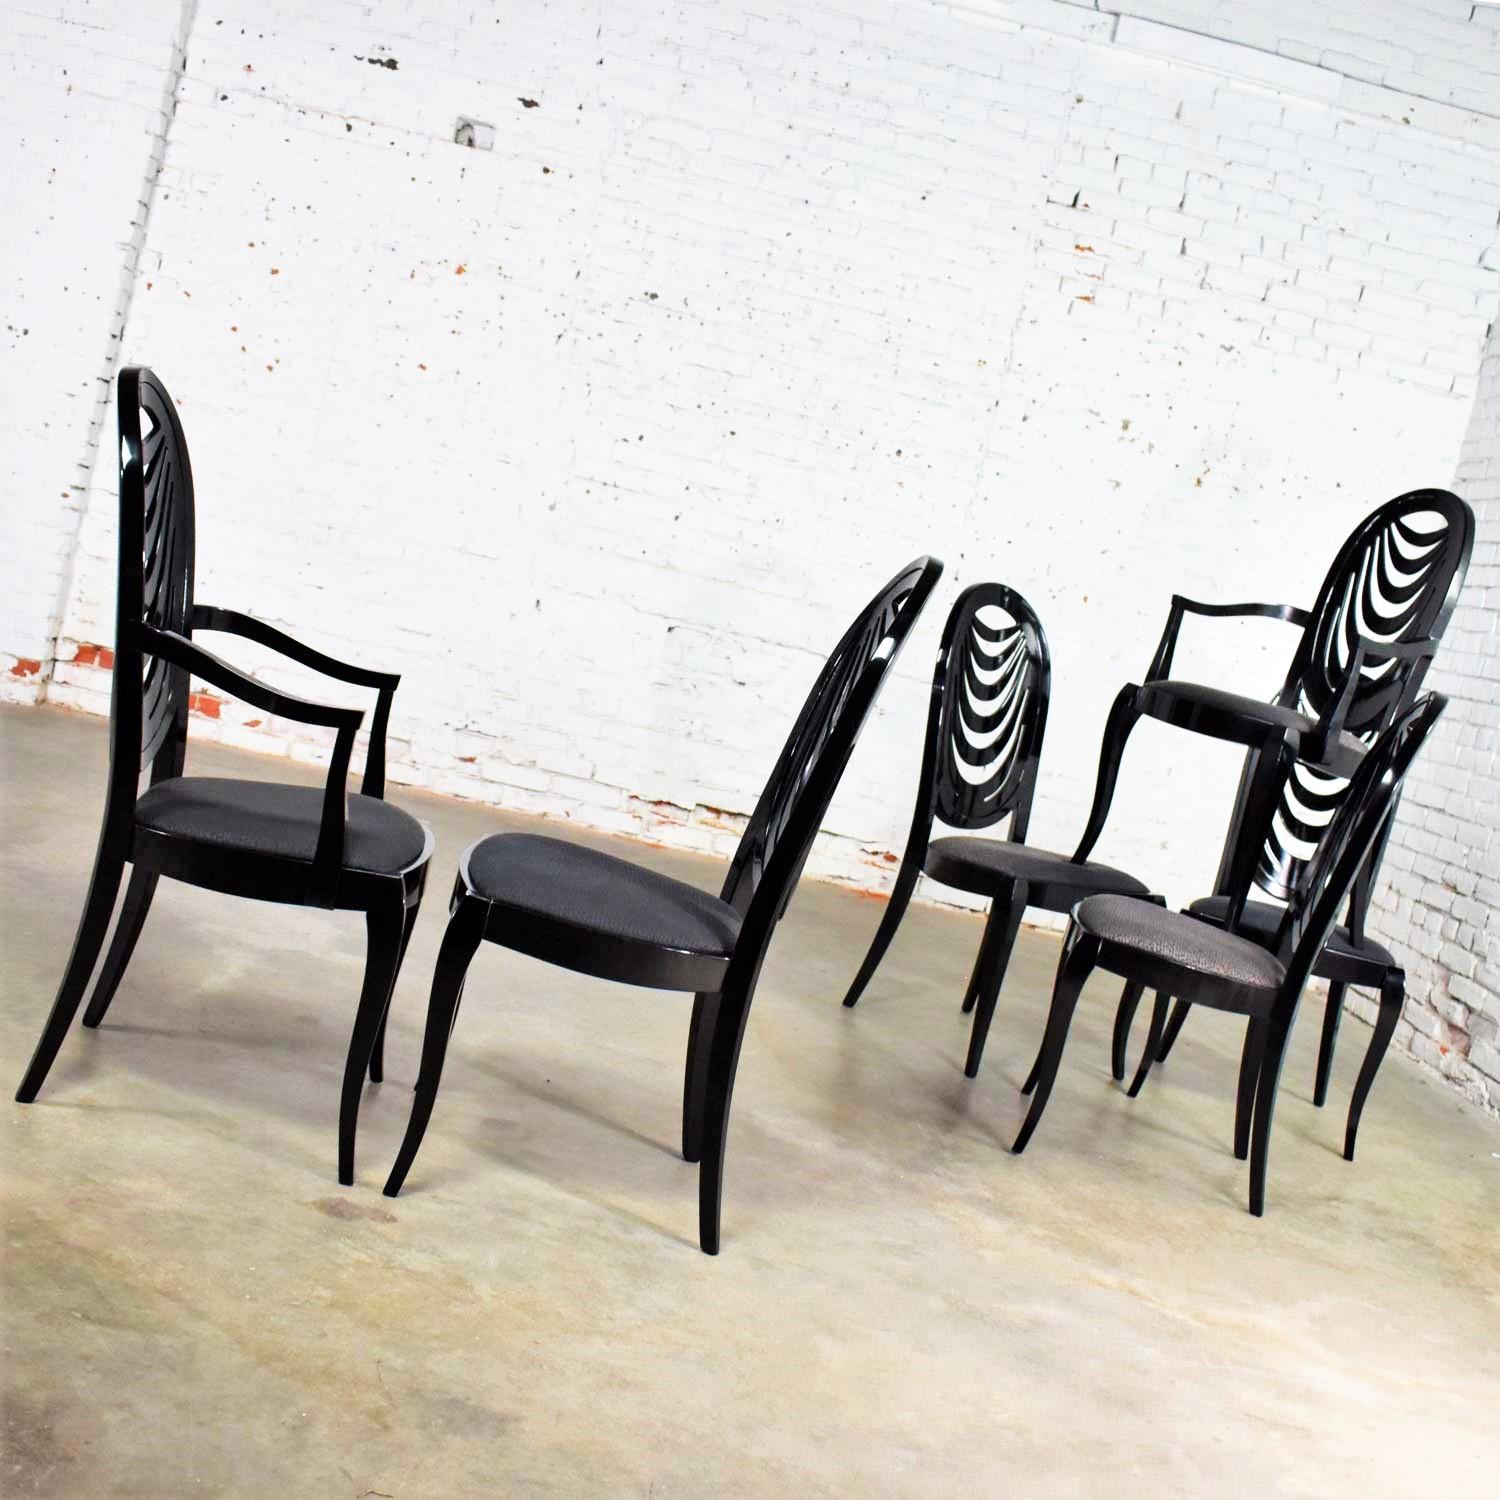 Black Lacquer Oval Drape Back Dining Chairs, Pietro Costantini for Ello Set of 6 2